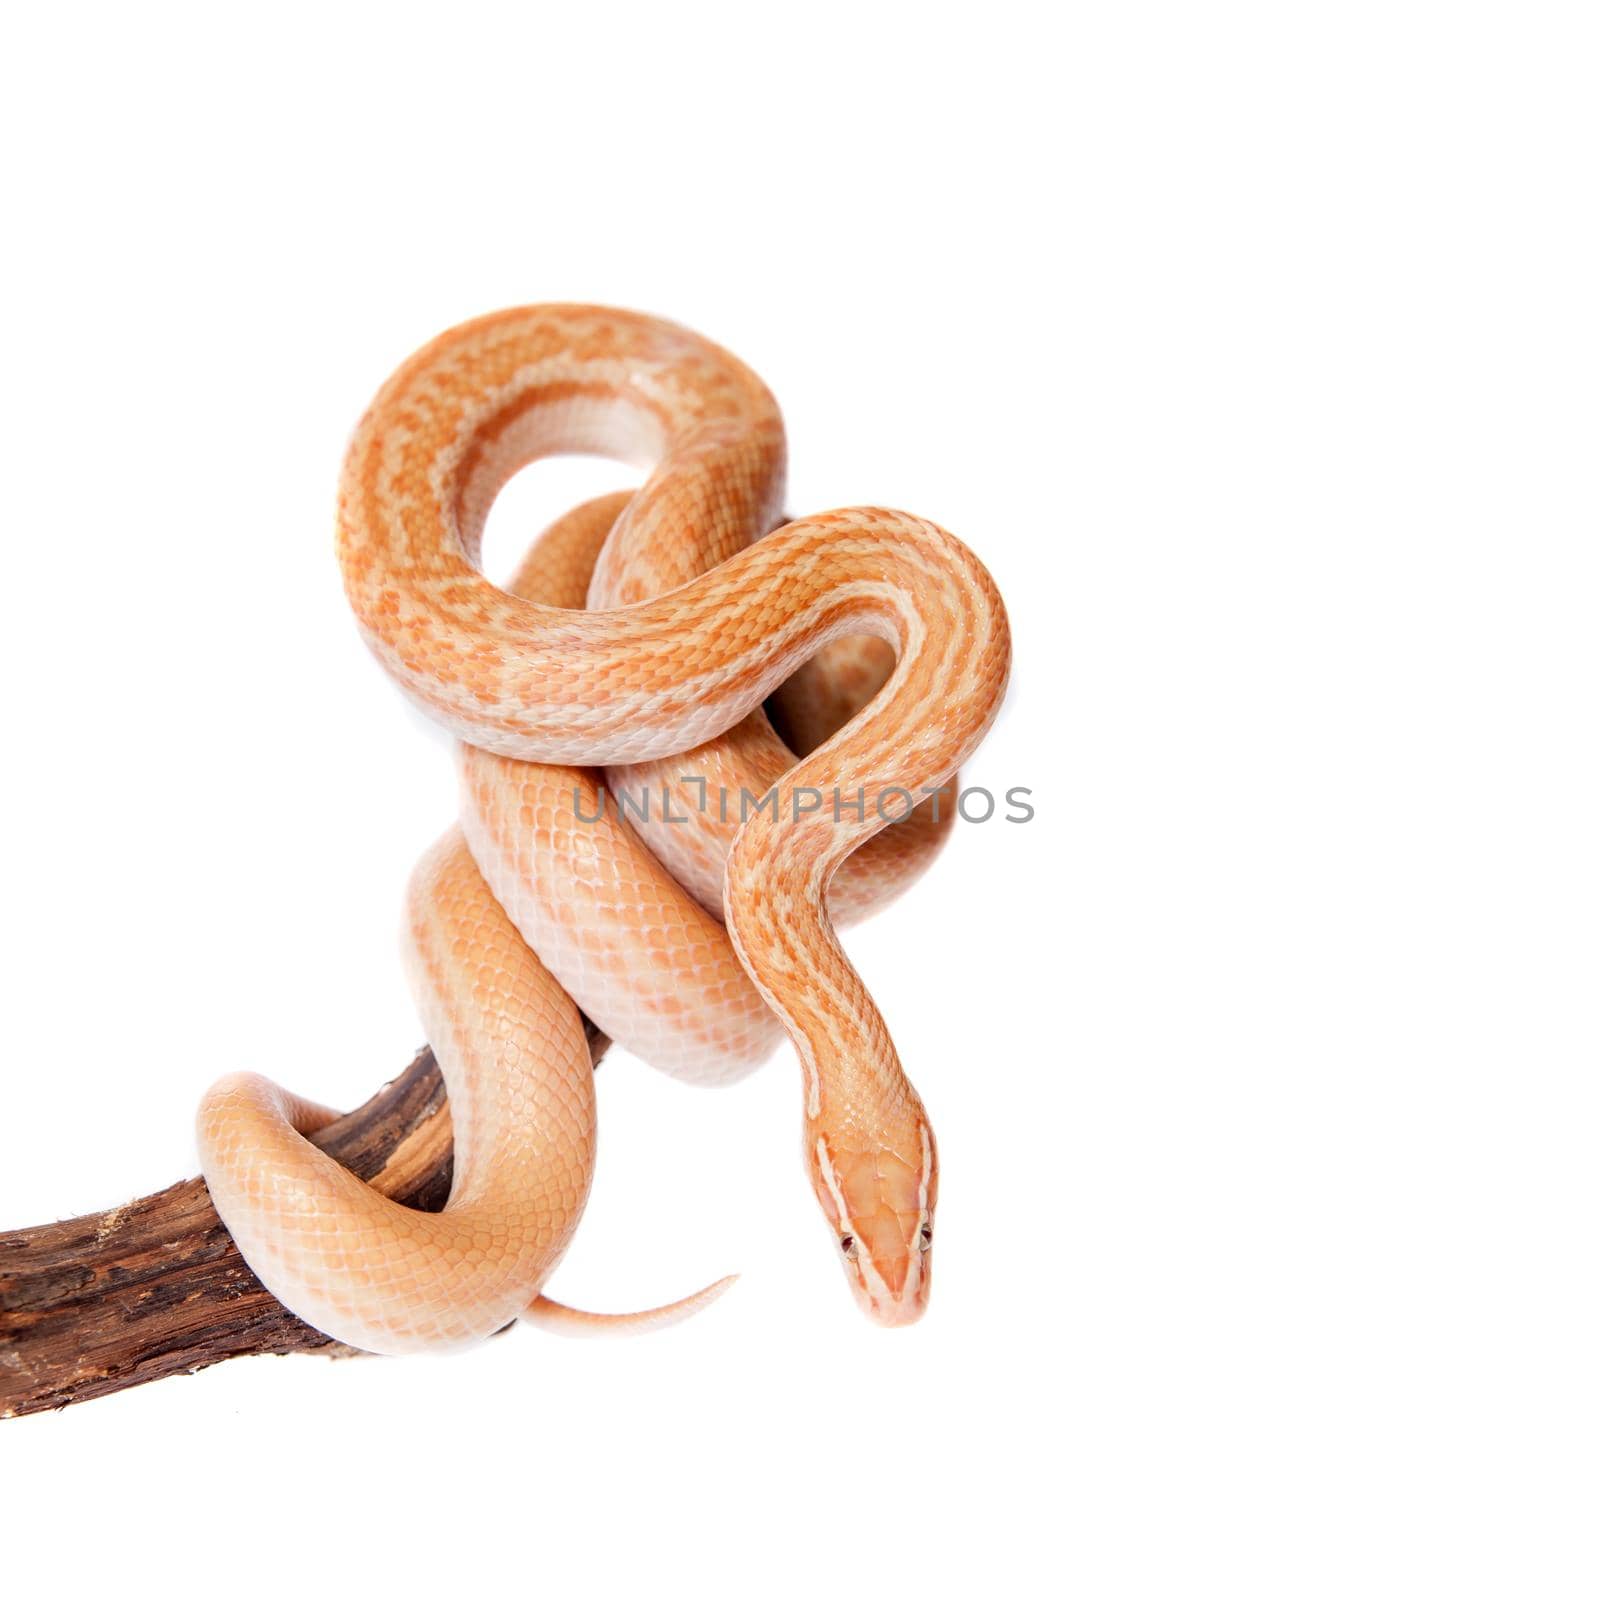 Coiled Cape House Snake on white background by RosaJay